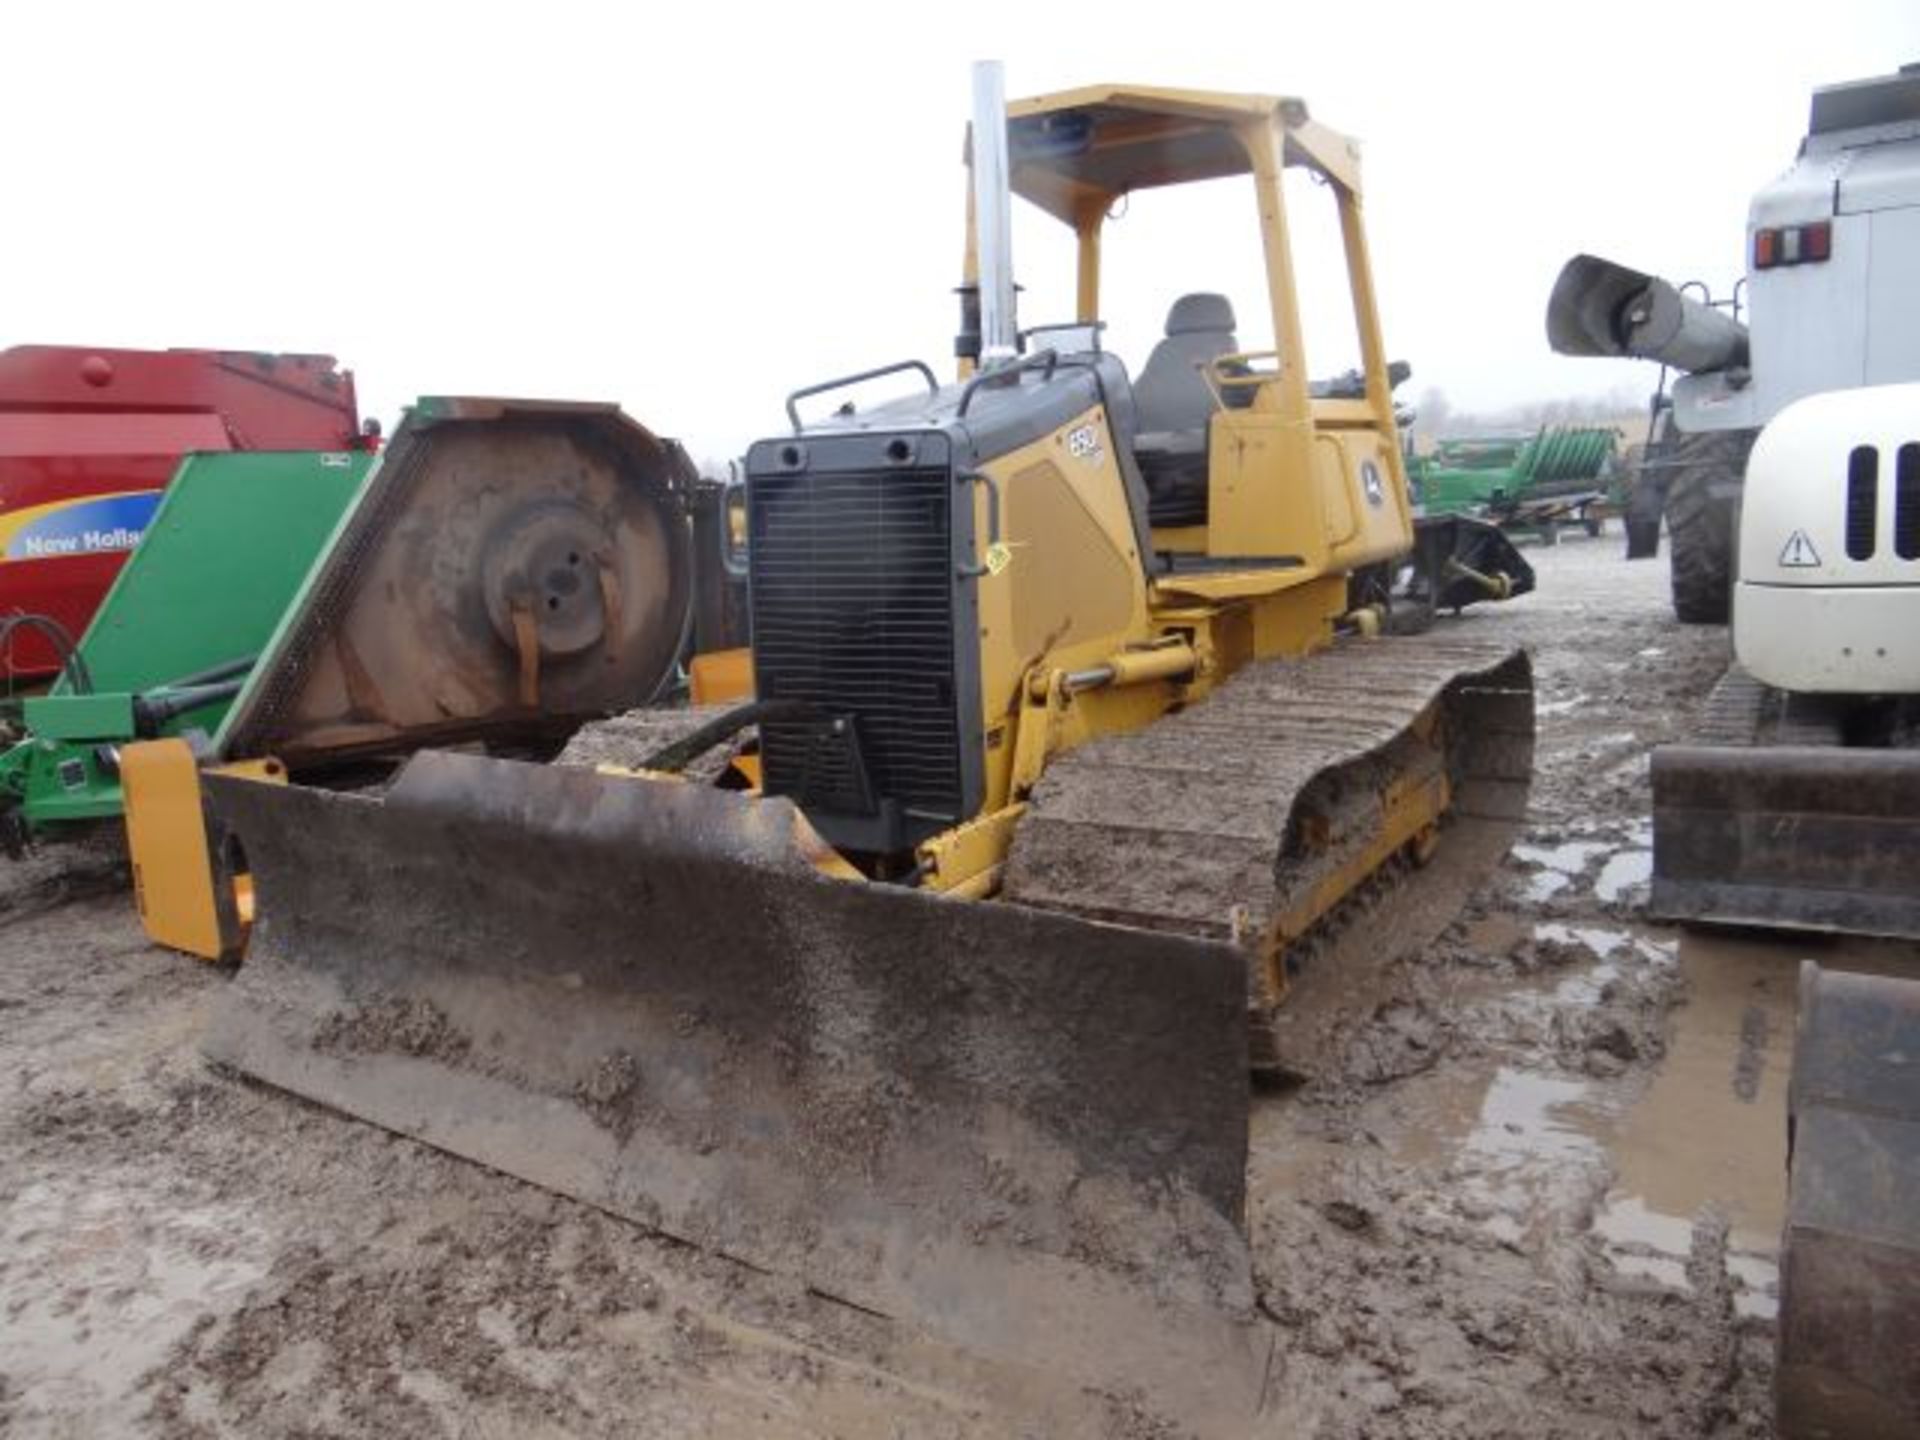 JD 650J LPG Dozer, 2006 5100 hrs, 6-Way PAT Blade, 60% Undercarriage, Farmer Owned